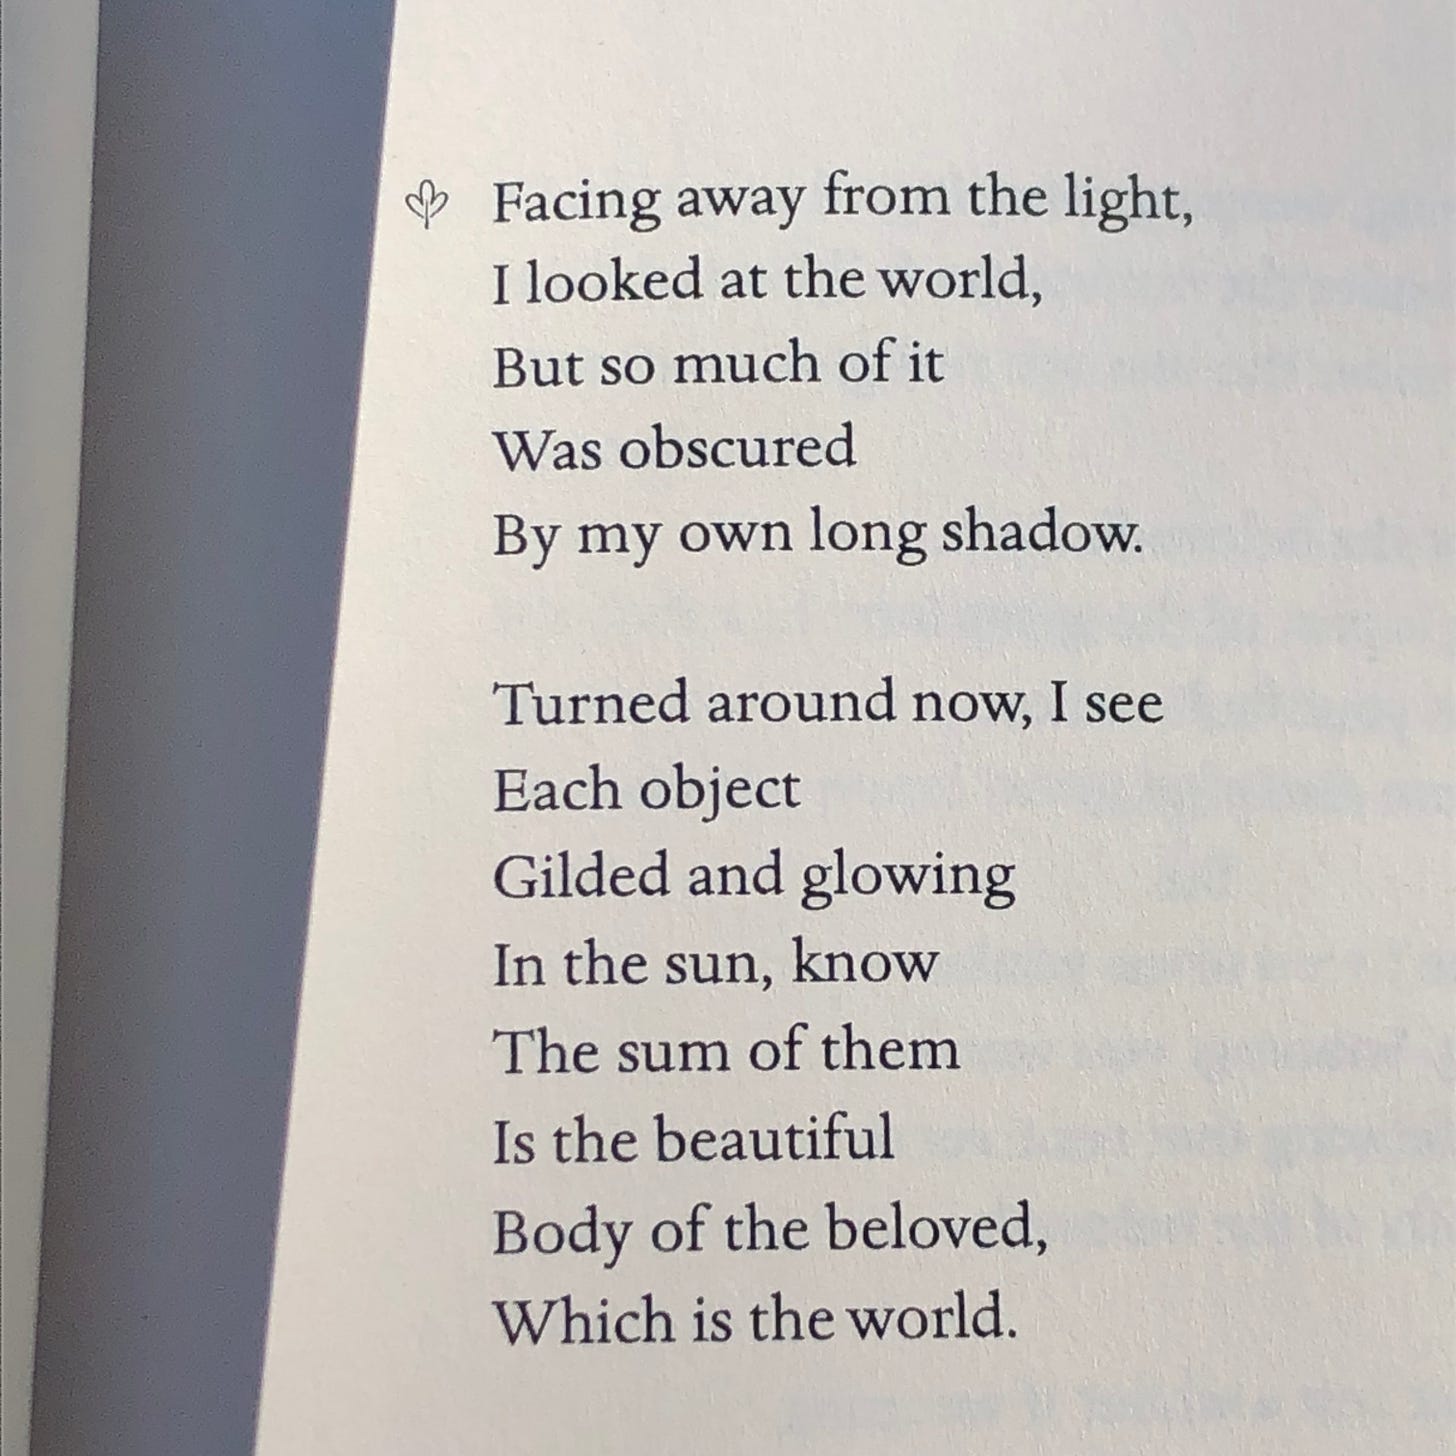 A poem: Facing away from the light, I looked at the world, but so much of it was obscured by my own long shadow. Turned around now, I see each object gilded and glowing in the sun, know the sum of them is the beautiful body of the beloved, which is the world.